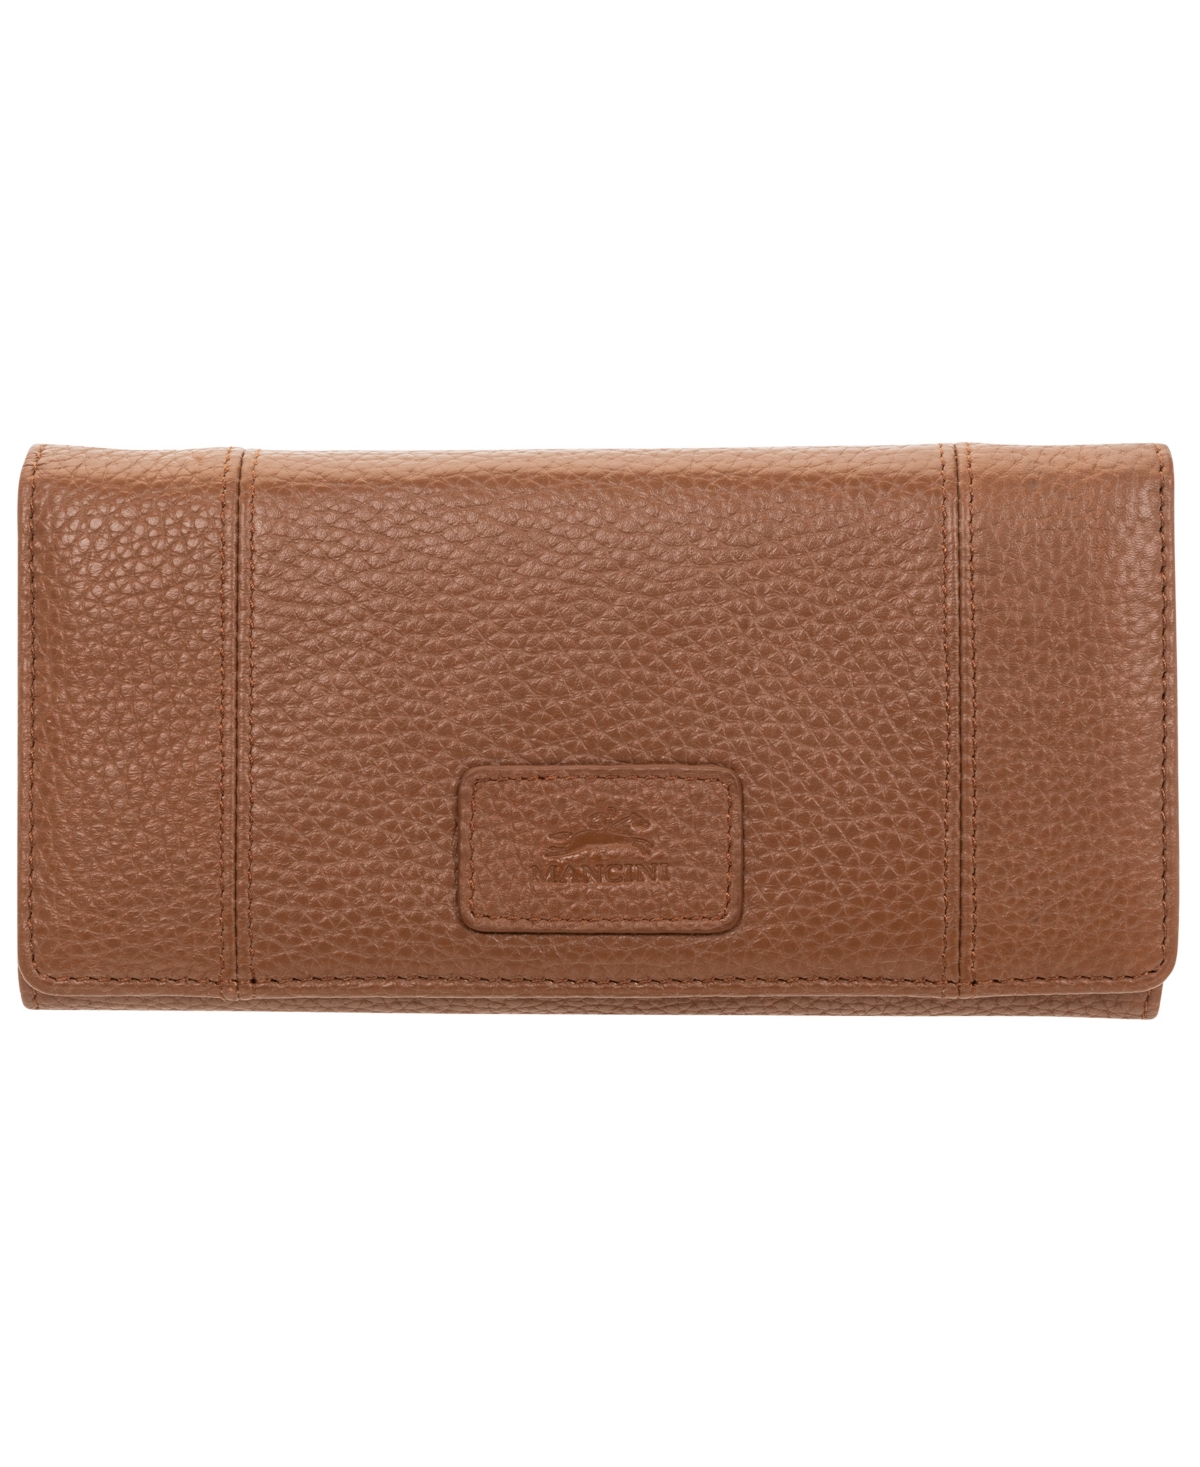 Mancini Women's Pebbled Collection Rfid Secure Trifold Wallet In Camel